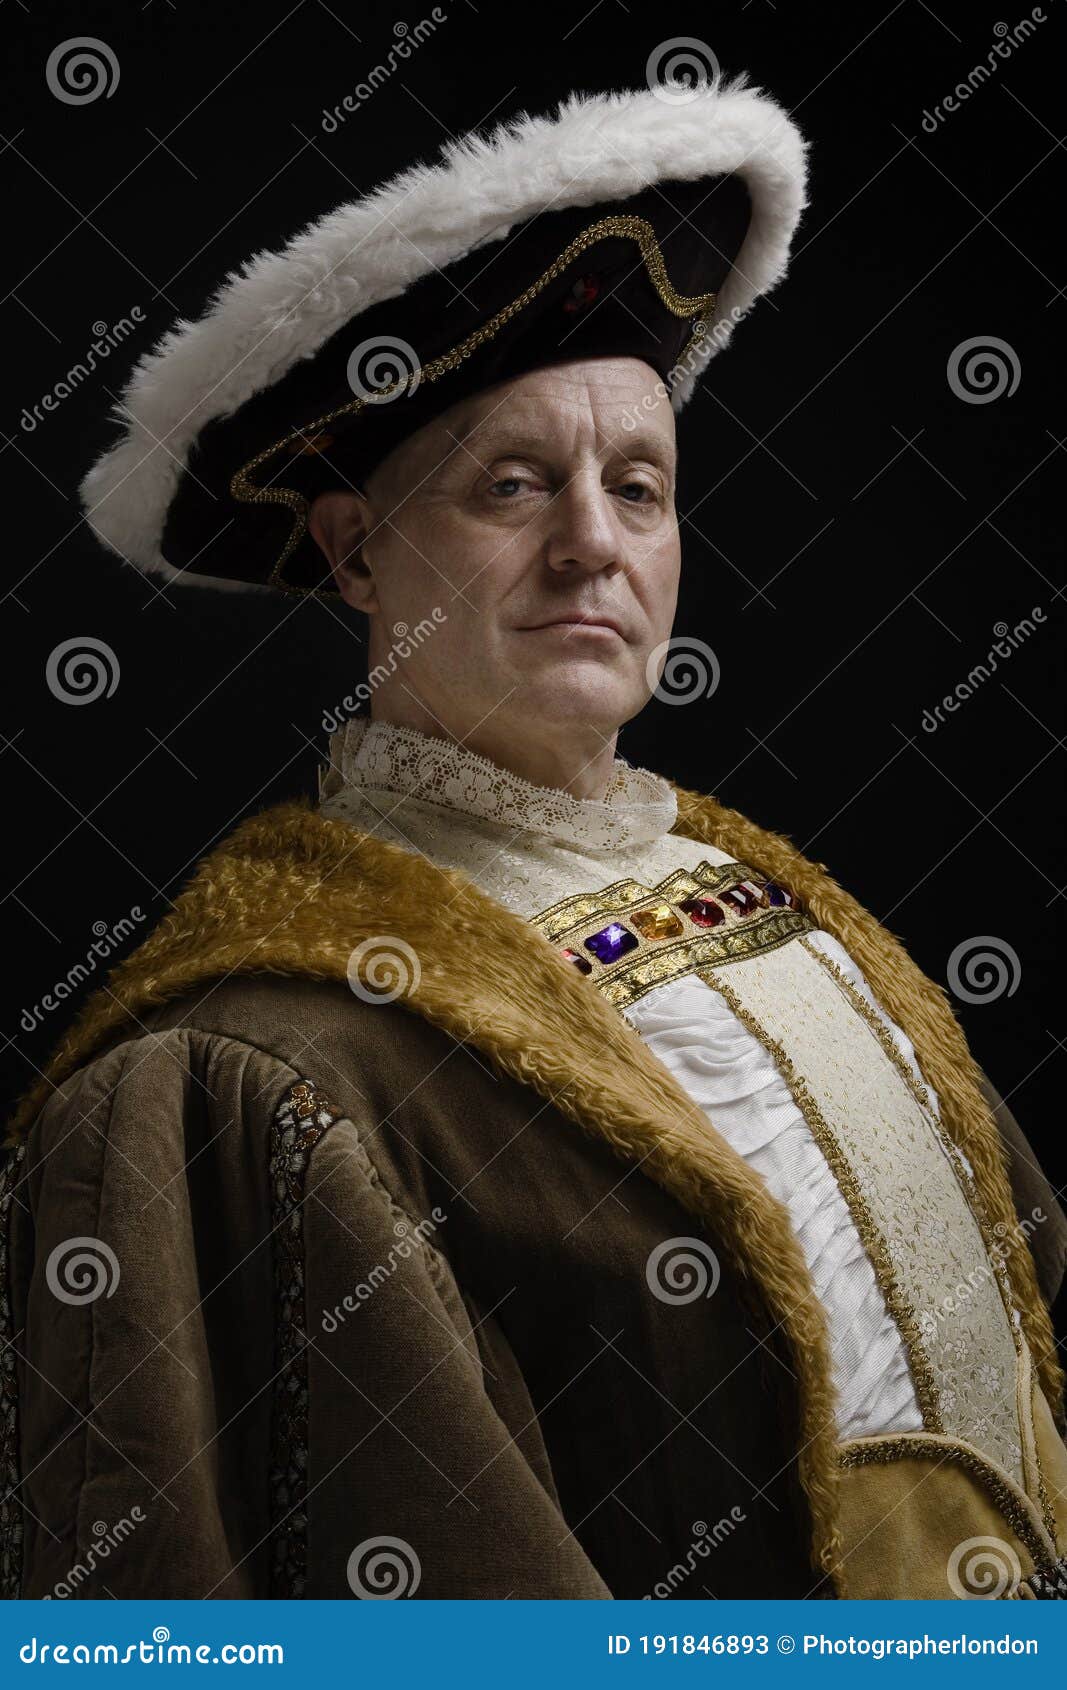 portrait of king henry viii in historical costume